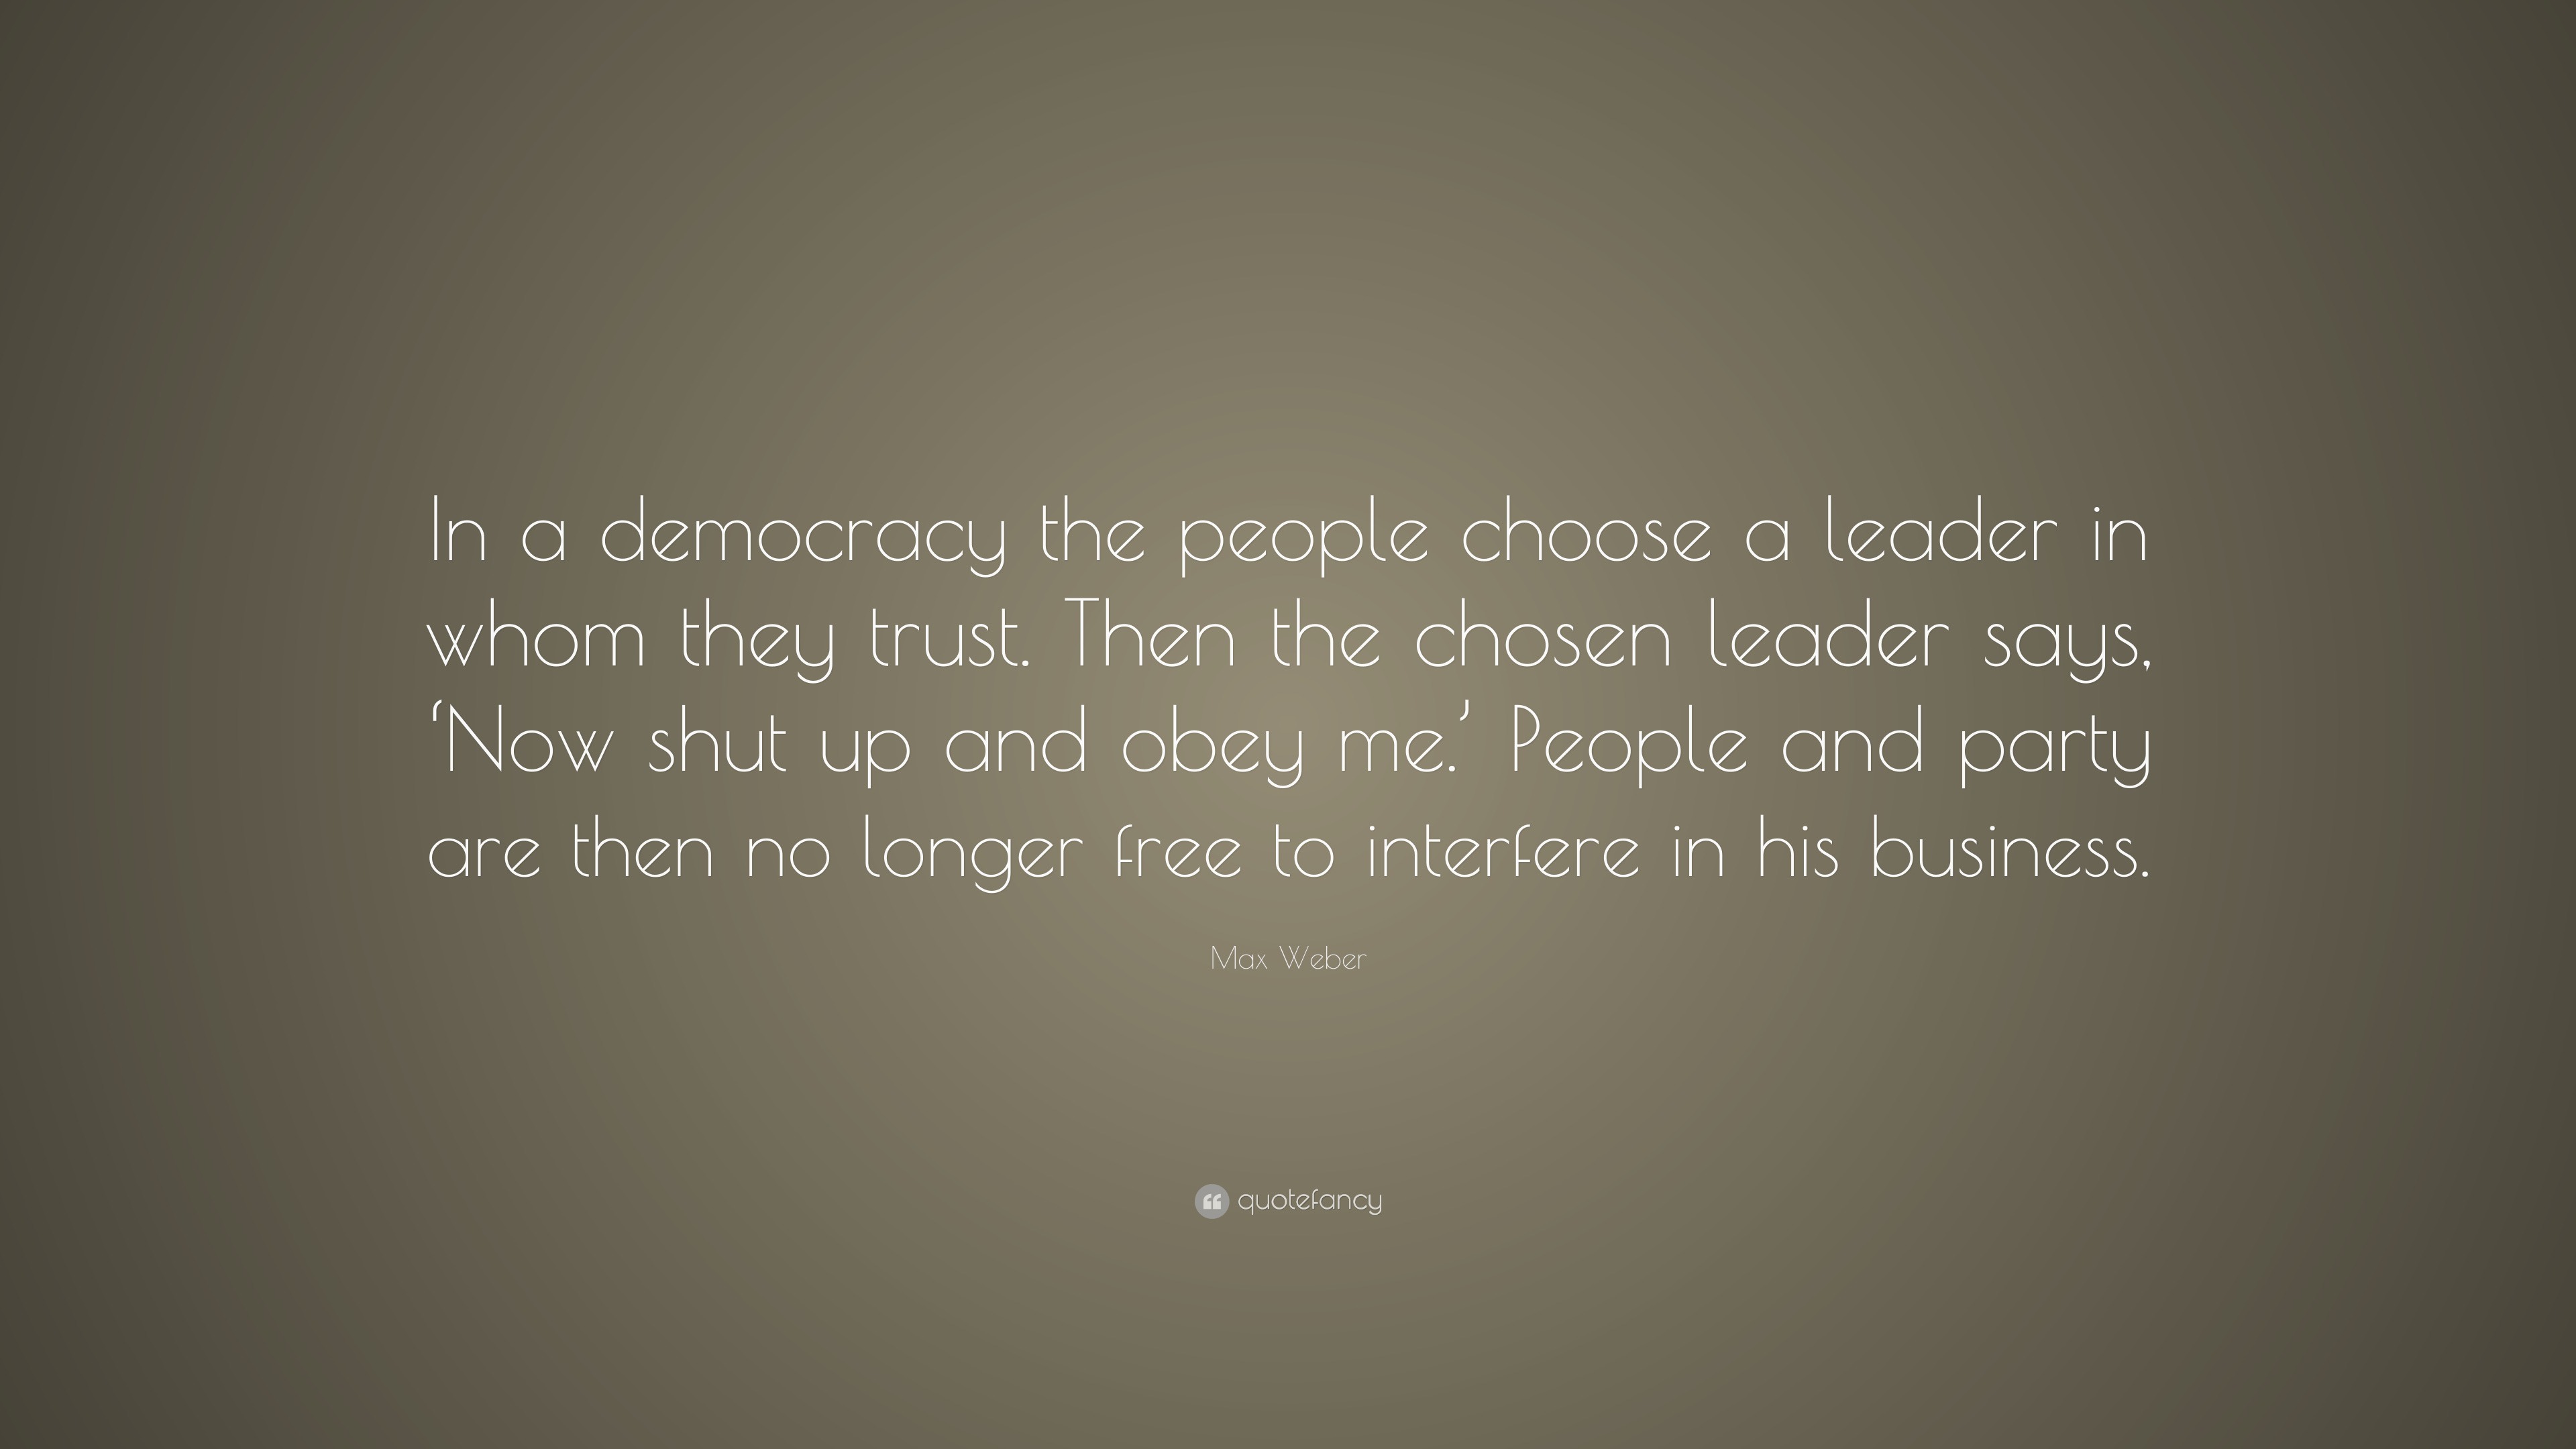 Max Weber Quote: “In a democracy the people choose a leader in whom ...